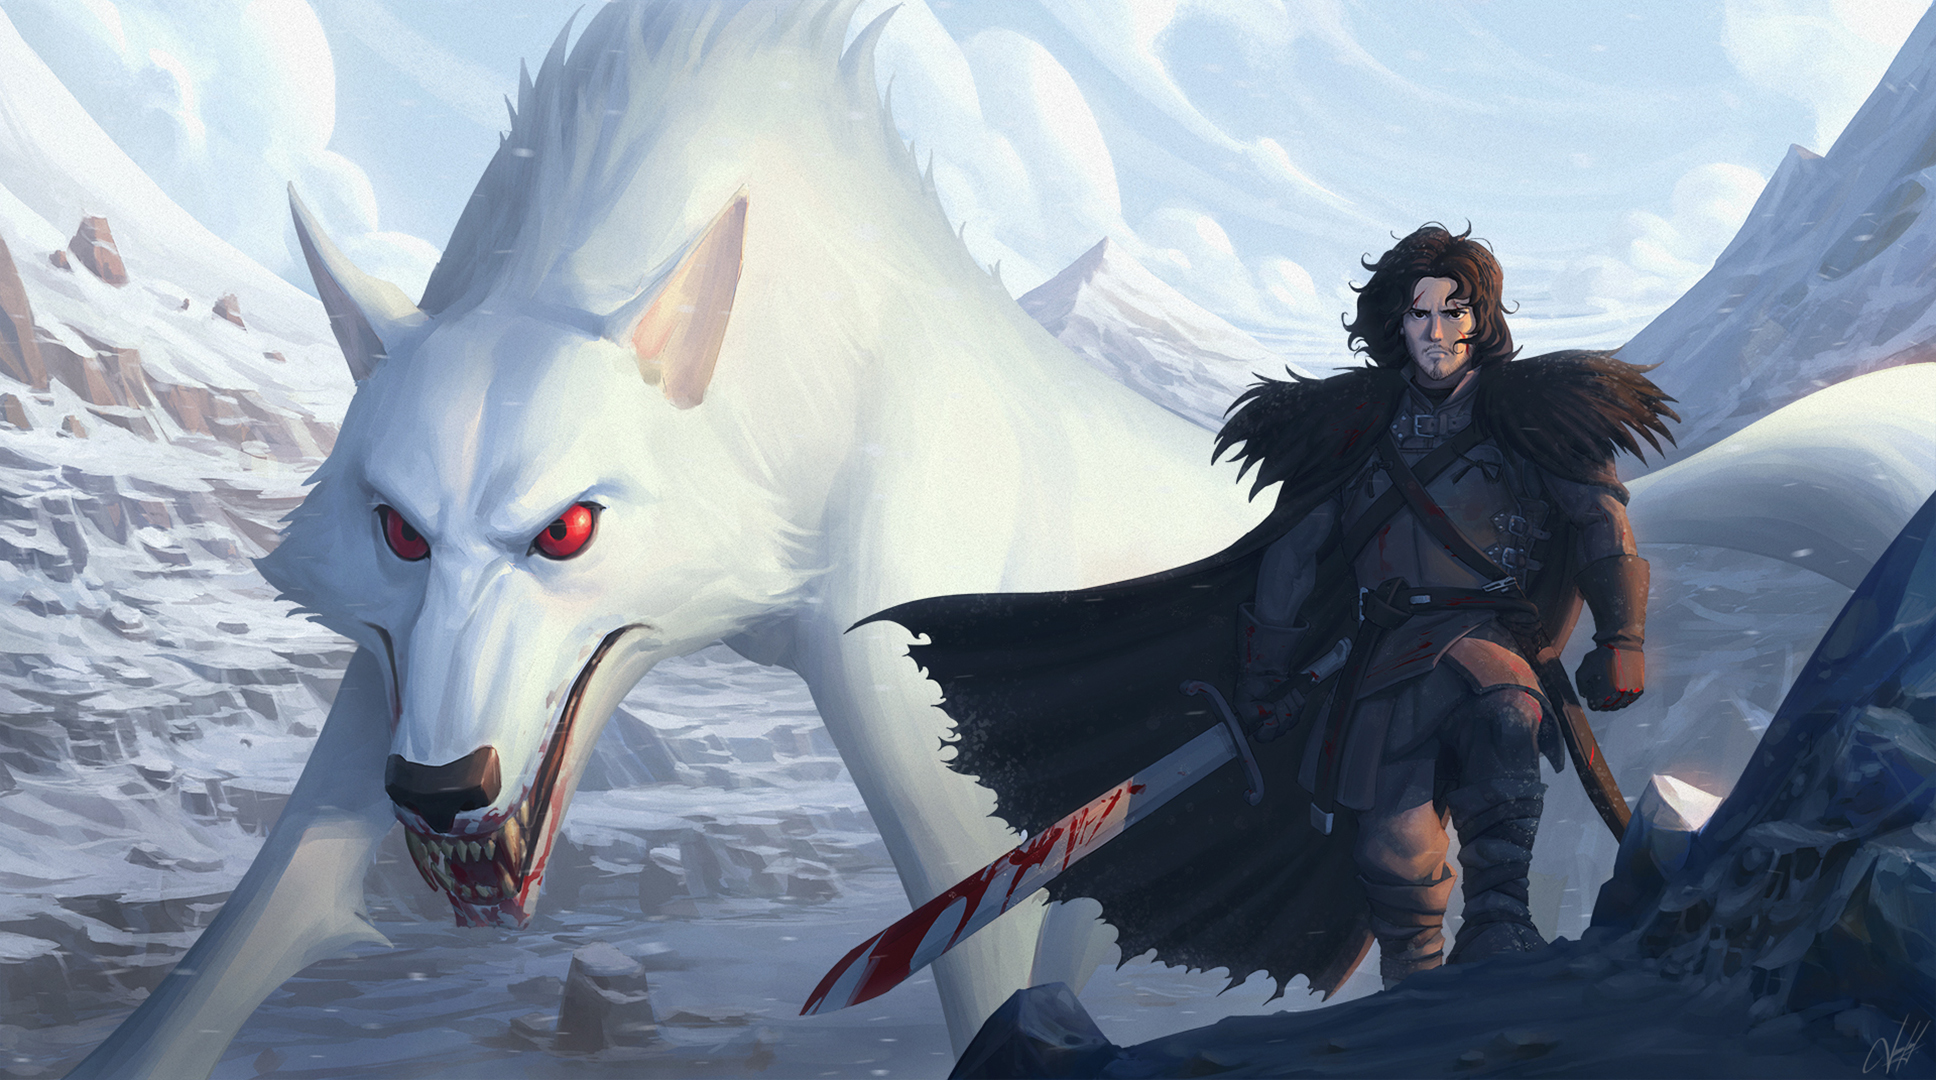 HD desktop wallpaper: Fantasy, Game Of Thrones, Wolf, Warrior, Sword, Jon  Snow, A Song Of Ice And Fire download free picture #739651